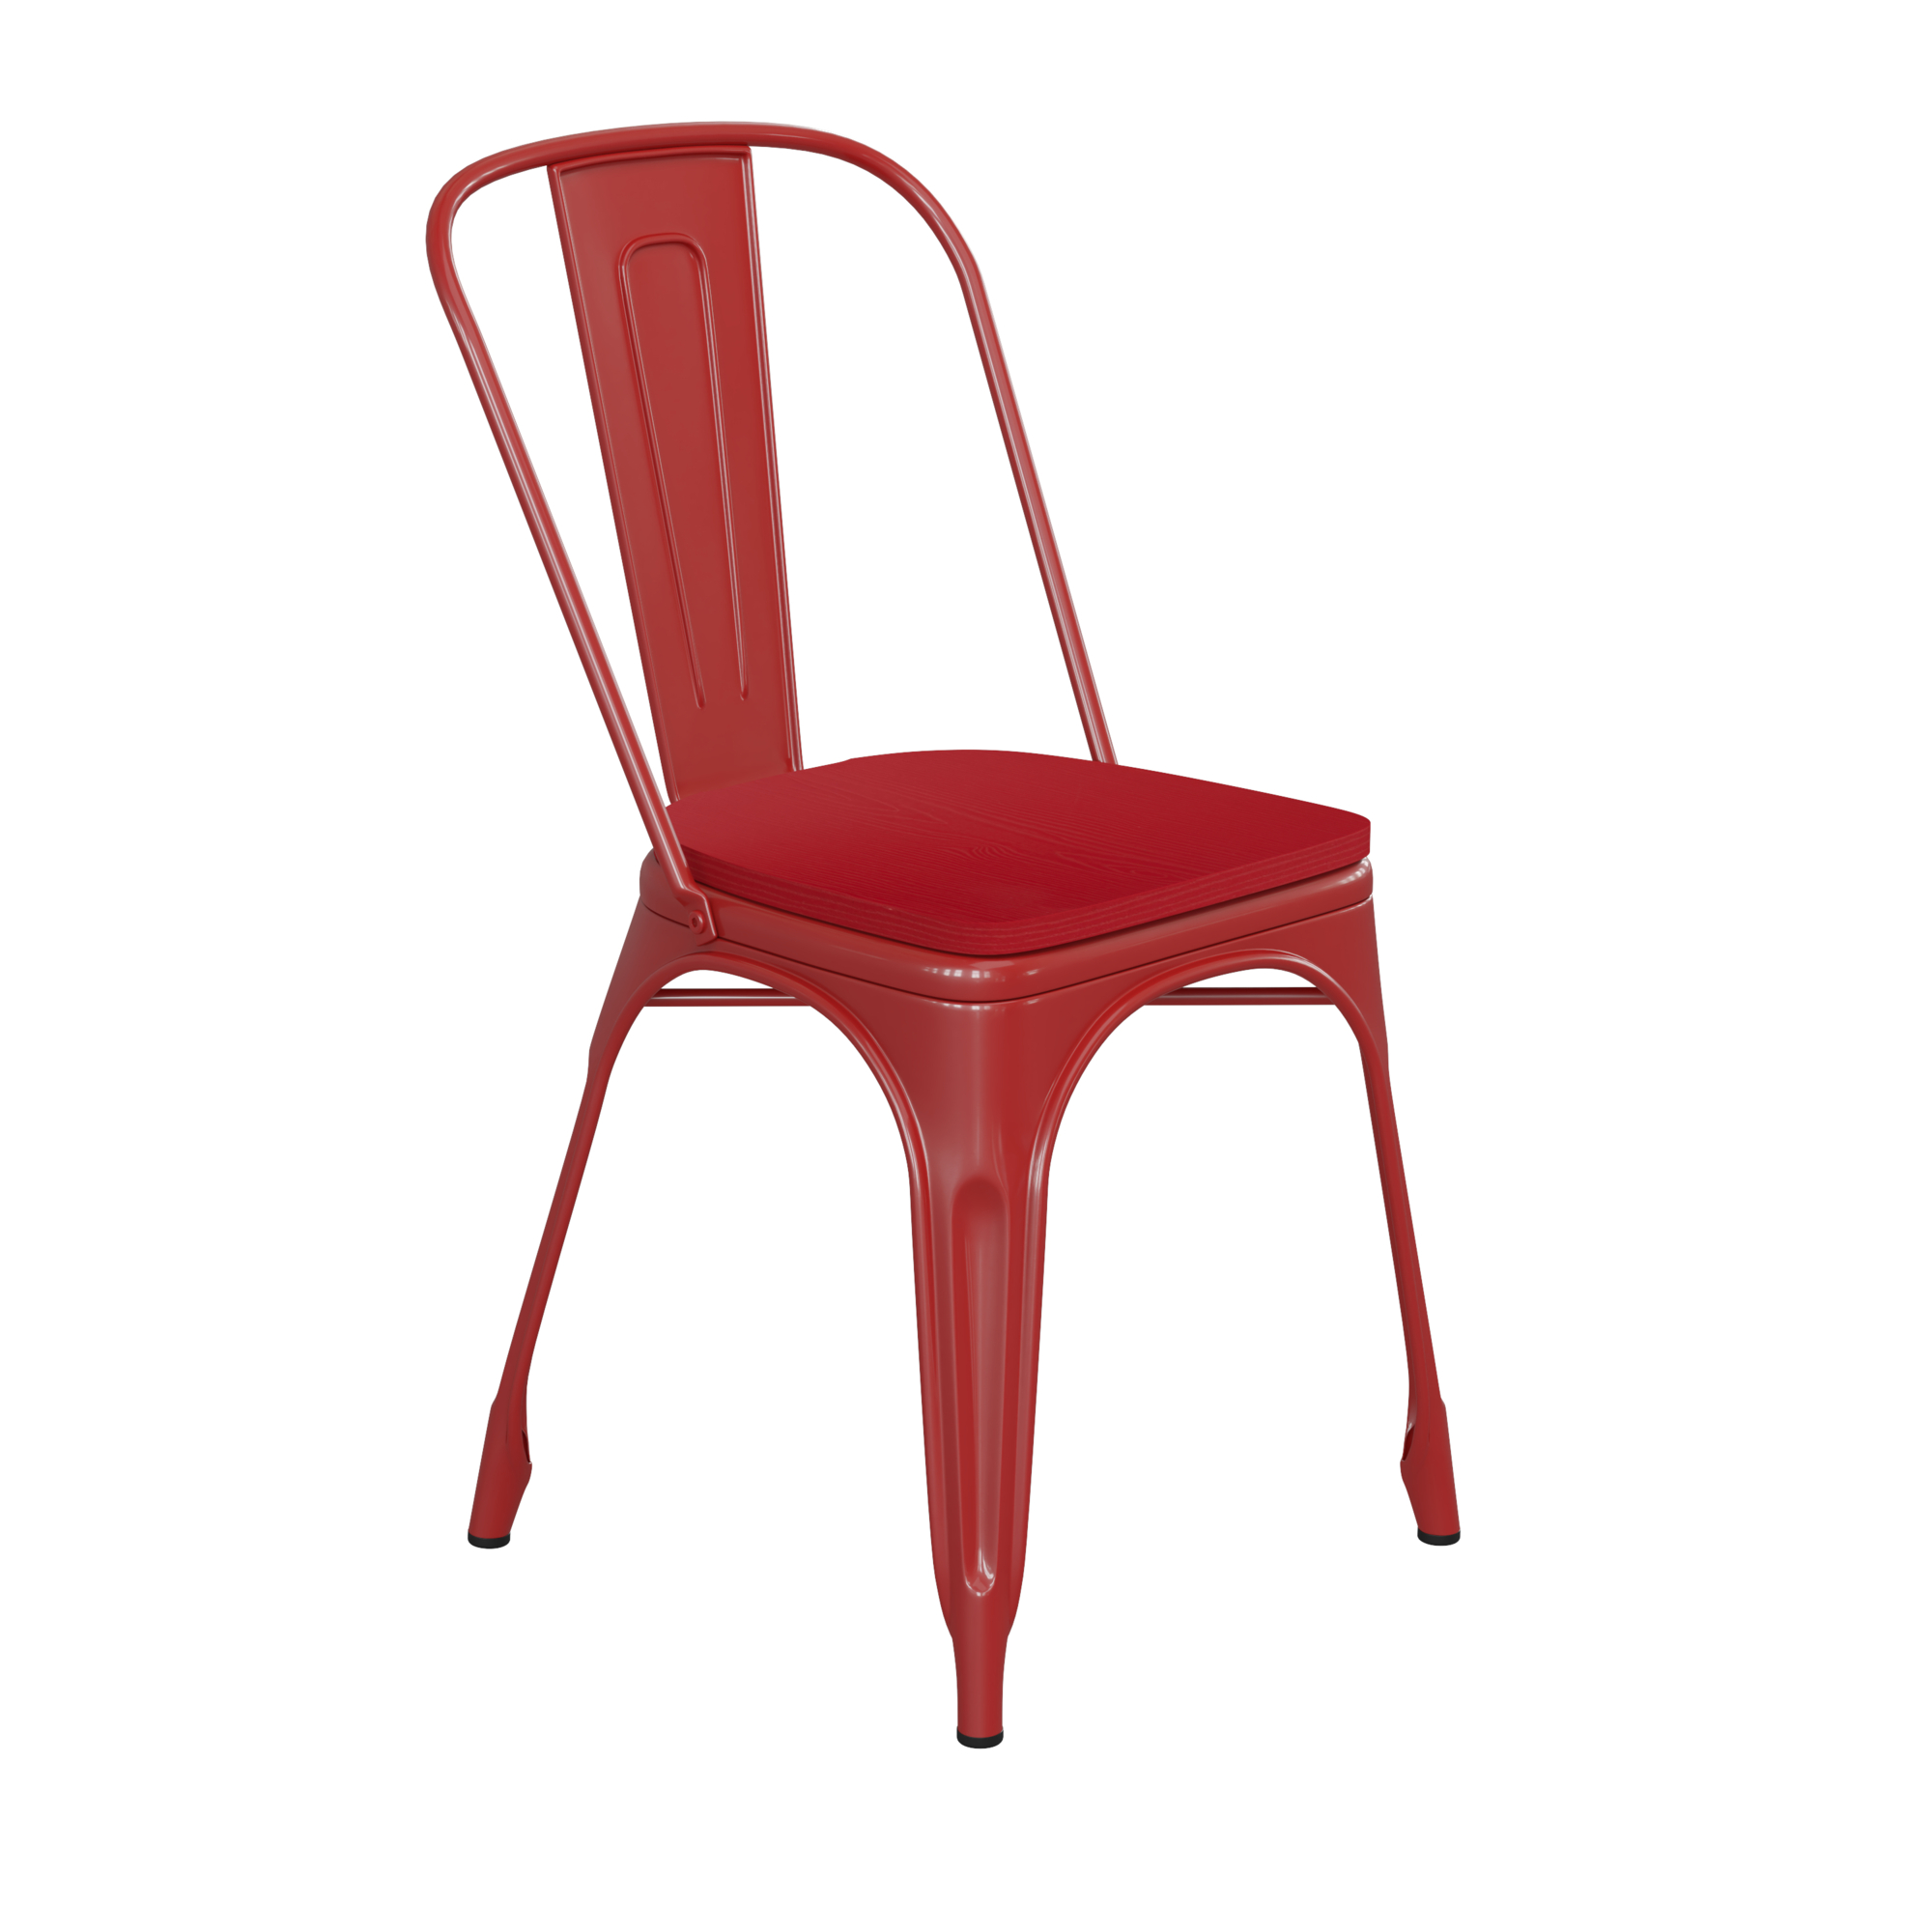 Flash Furniture, Red Metal Stack Chair with Red Poly Resin Seat, Primary Color Red, Included (qty.) 1, Model CH31230REDPL1R